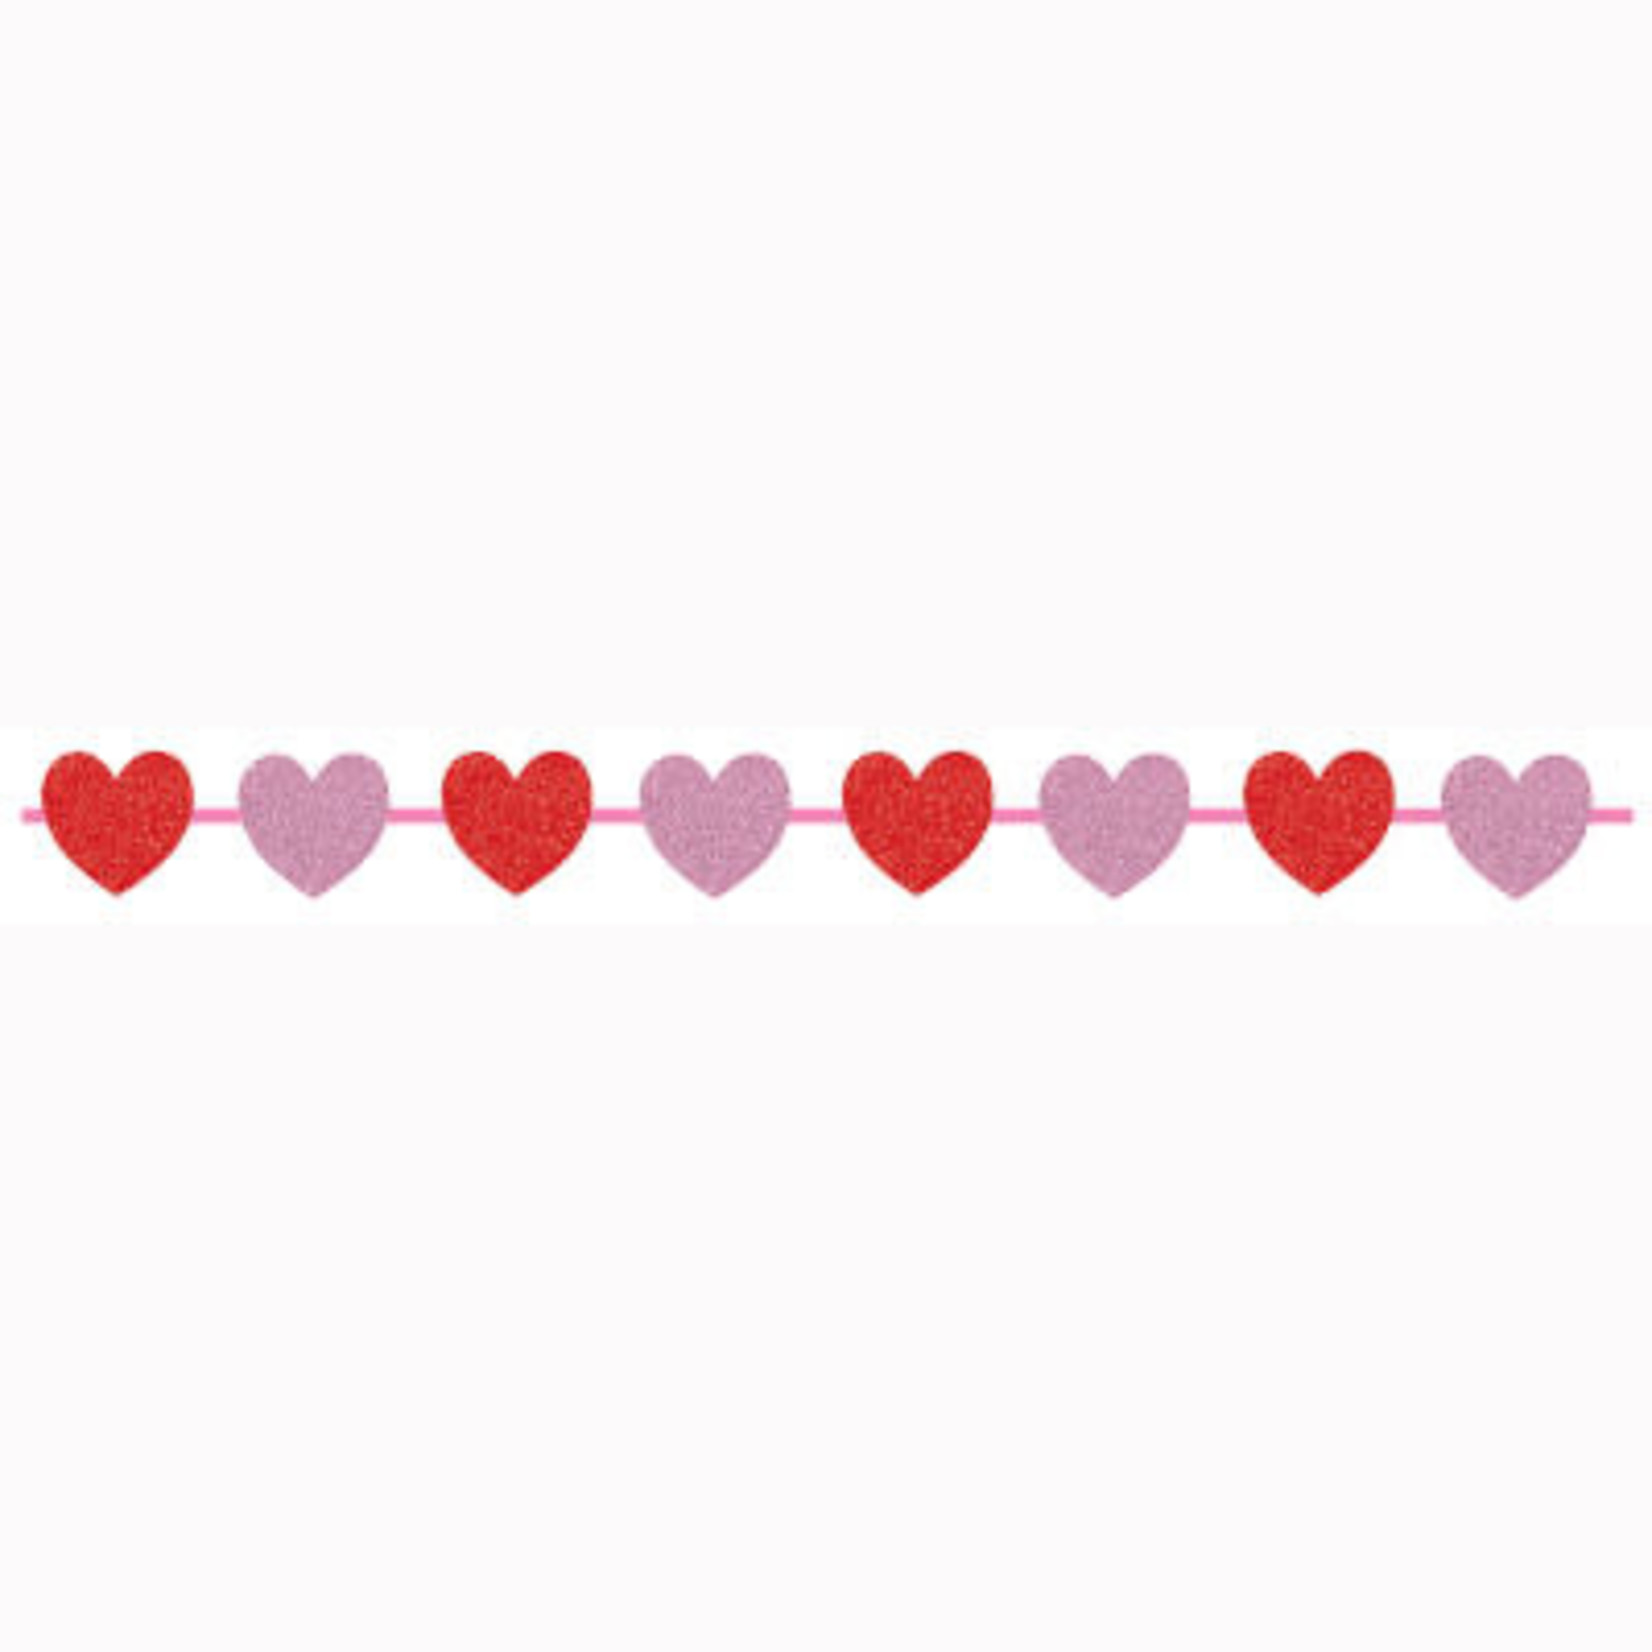 Creative Converting Red & Pink Hearts Garland, w/ Glitter Cutouts - 12ft